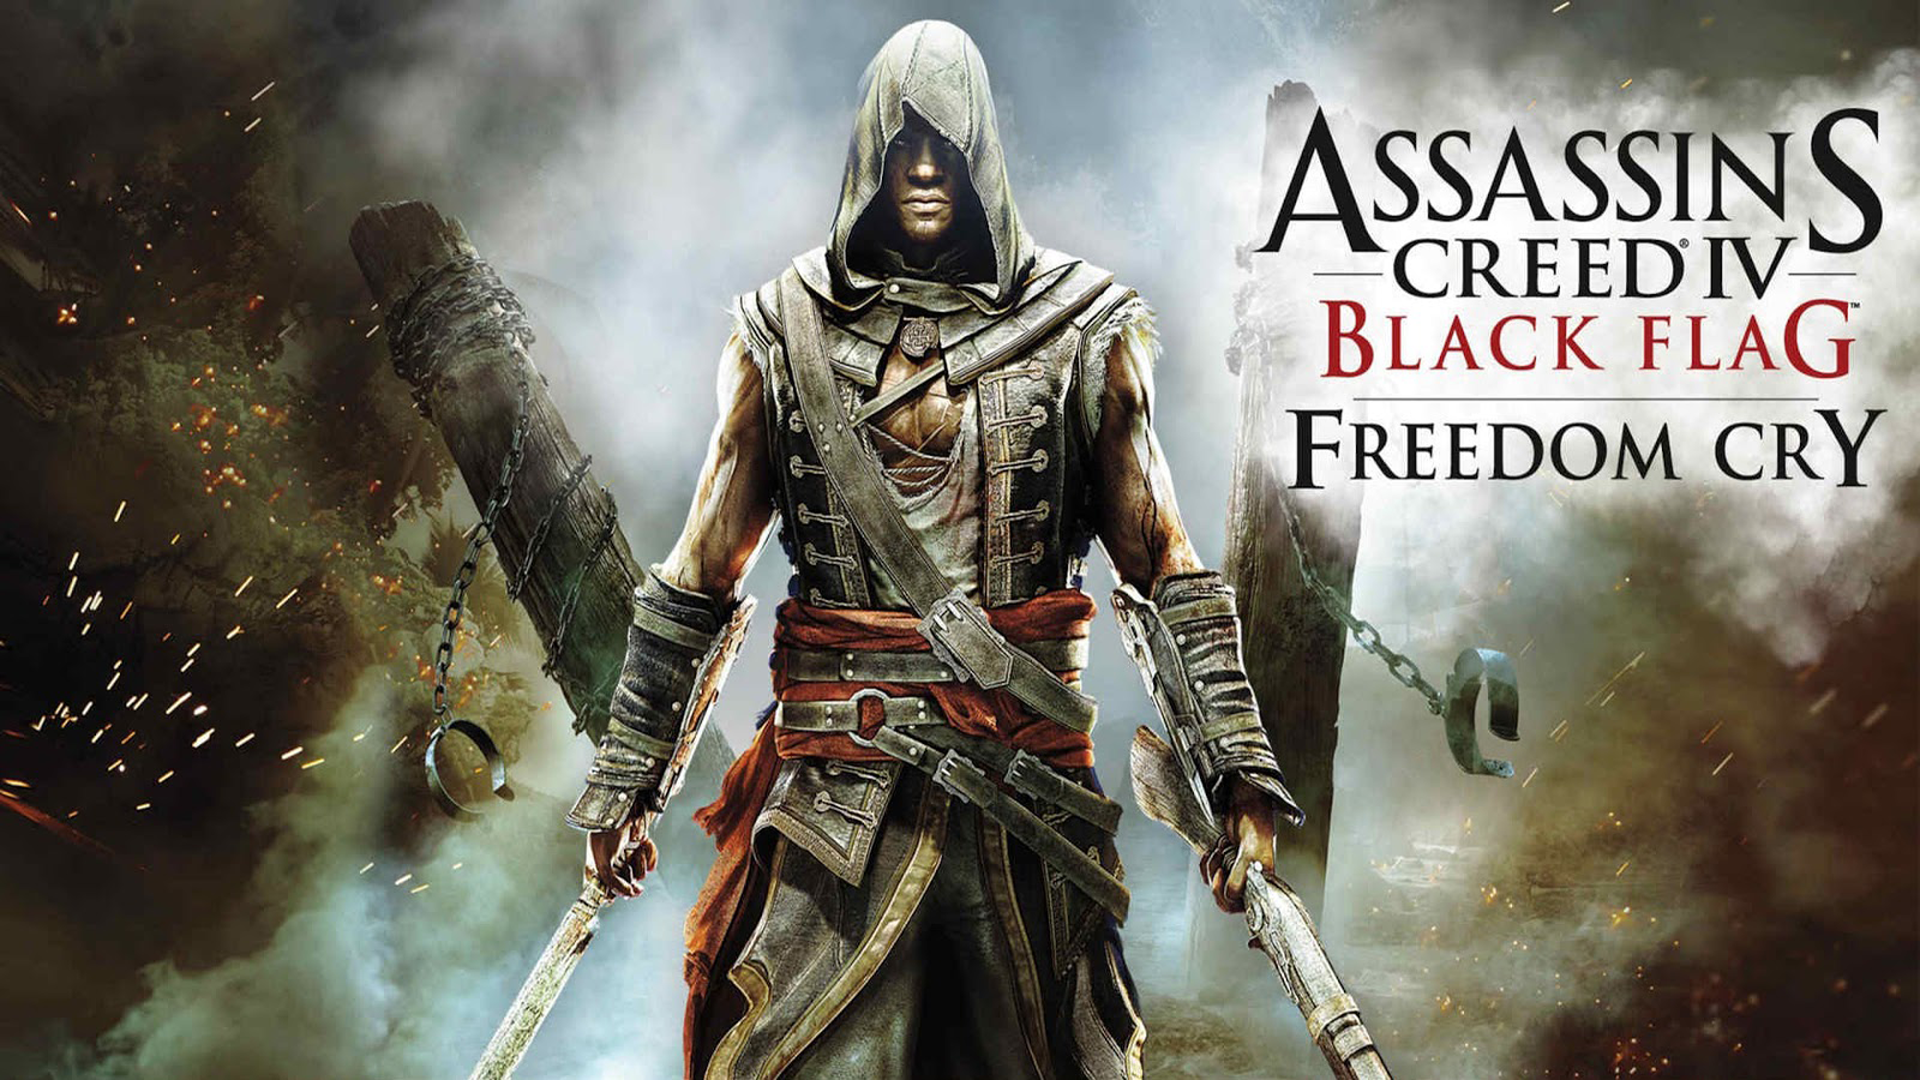 Let’s Play Assassin’s Creed Freedom Cry